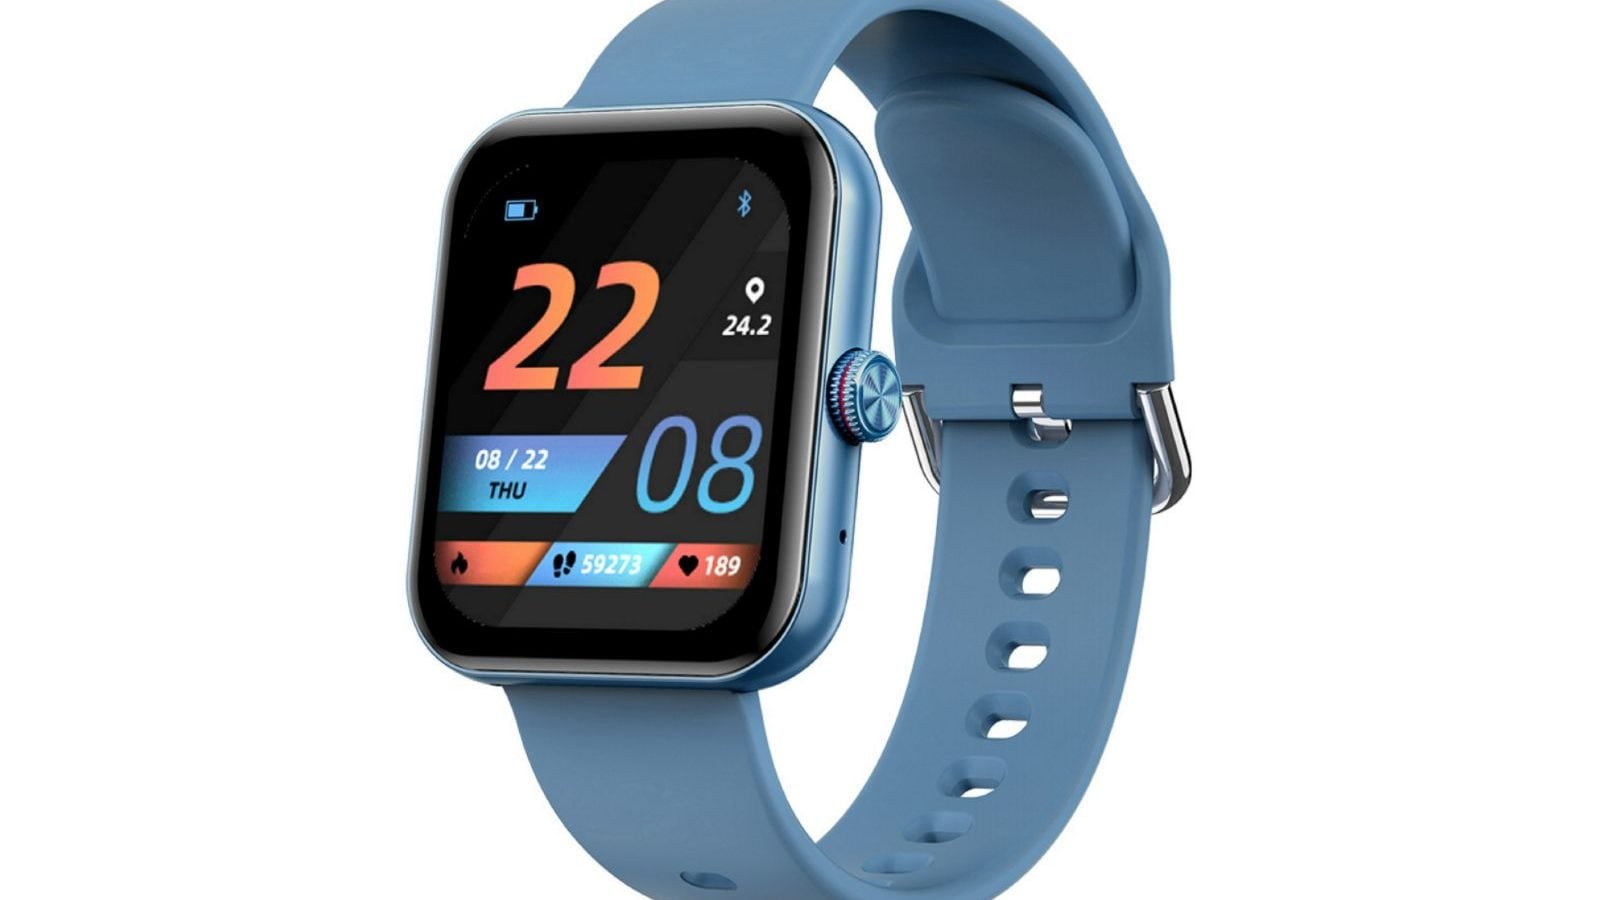 Ambrane FitShot Zest Smartwatch With Voice Calling Feature Launched in India